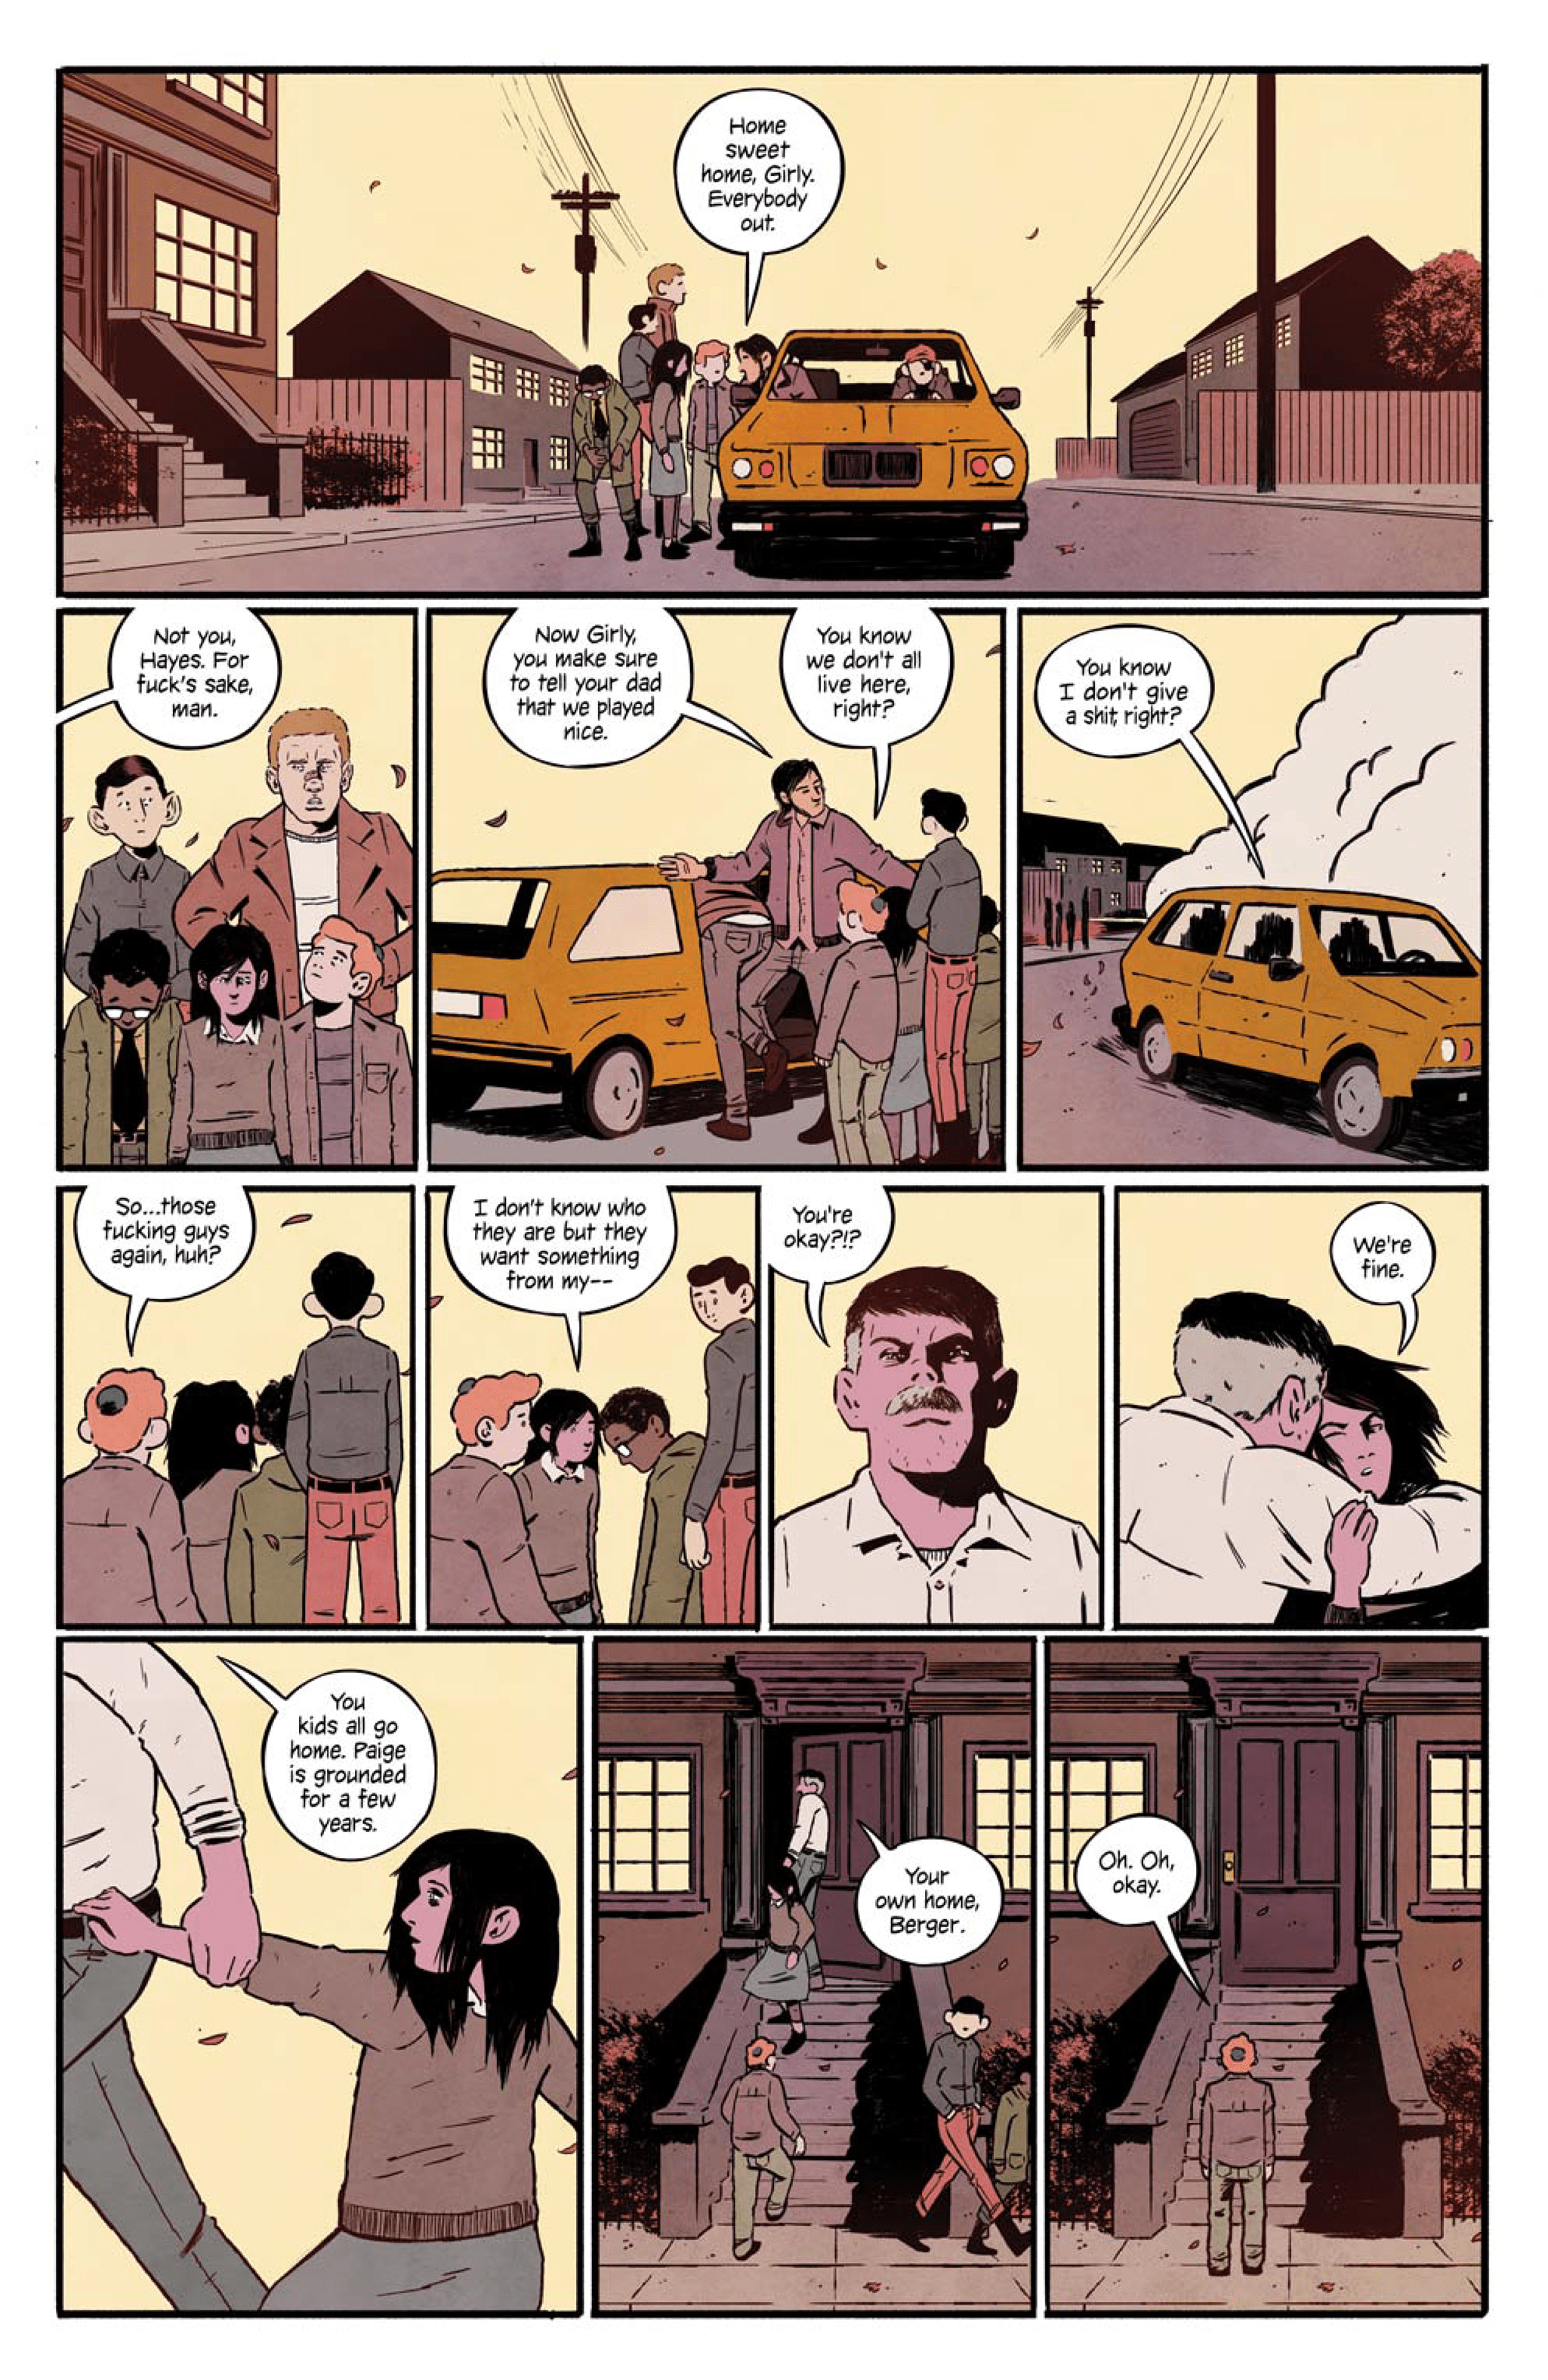 Read The First Issue Of Kid’s Crime Thriller 4 Kids Walk Into A Bank, Here For Free